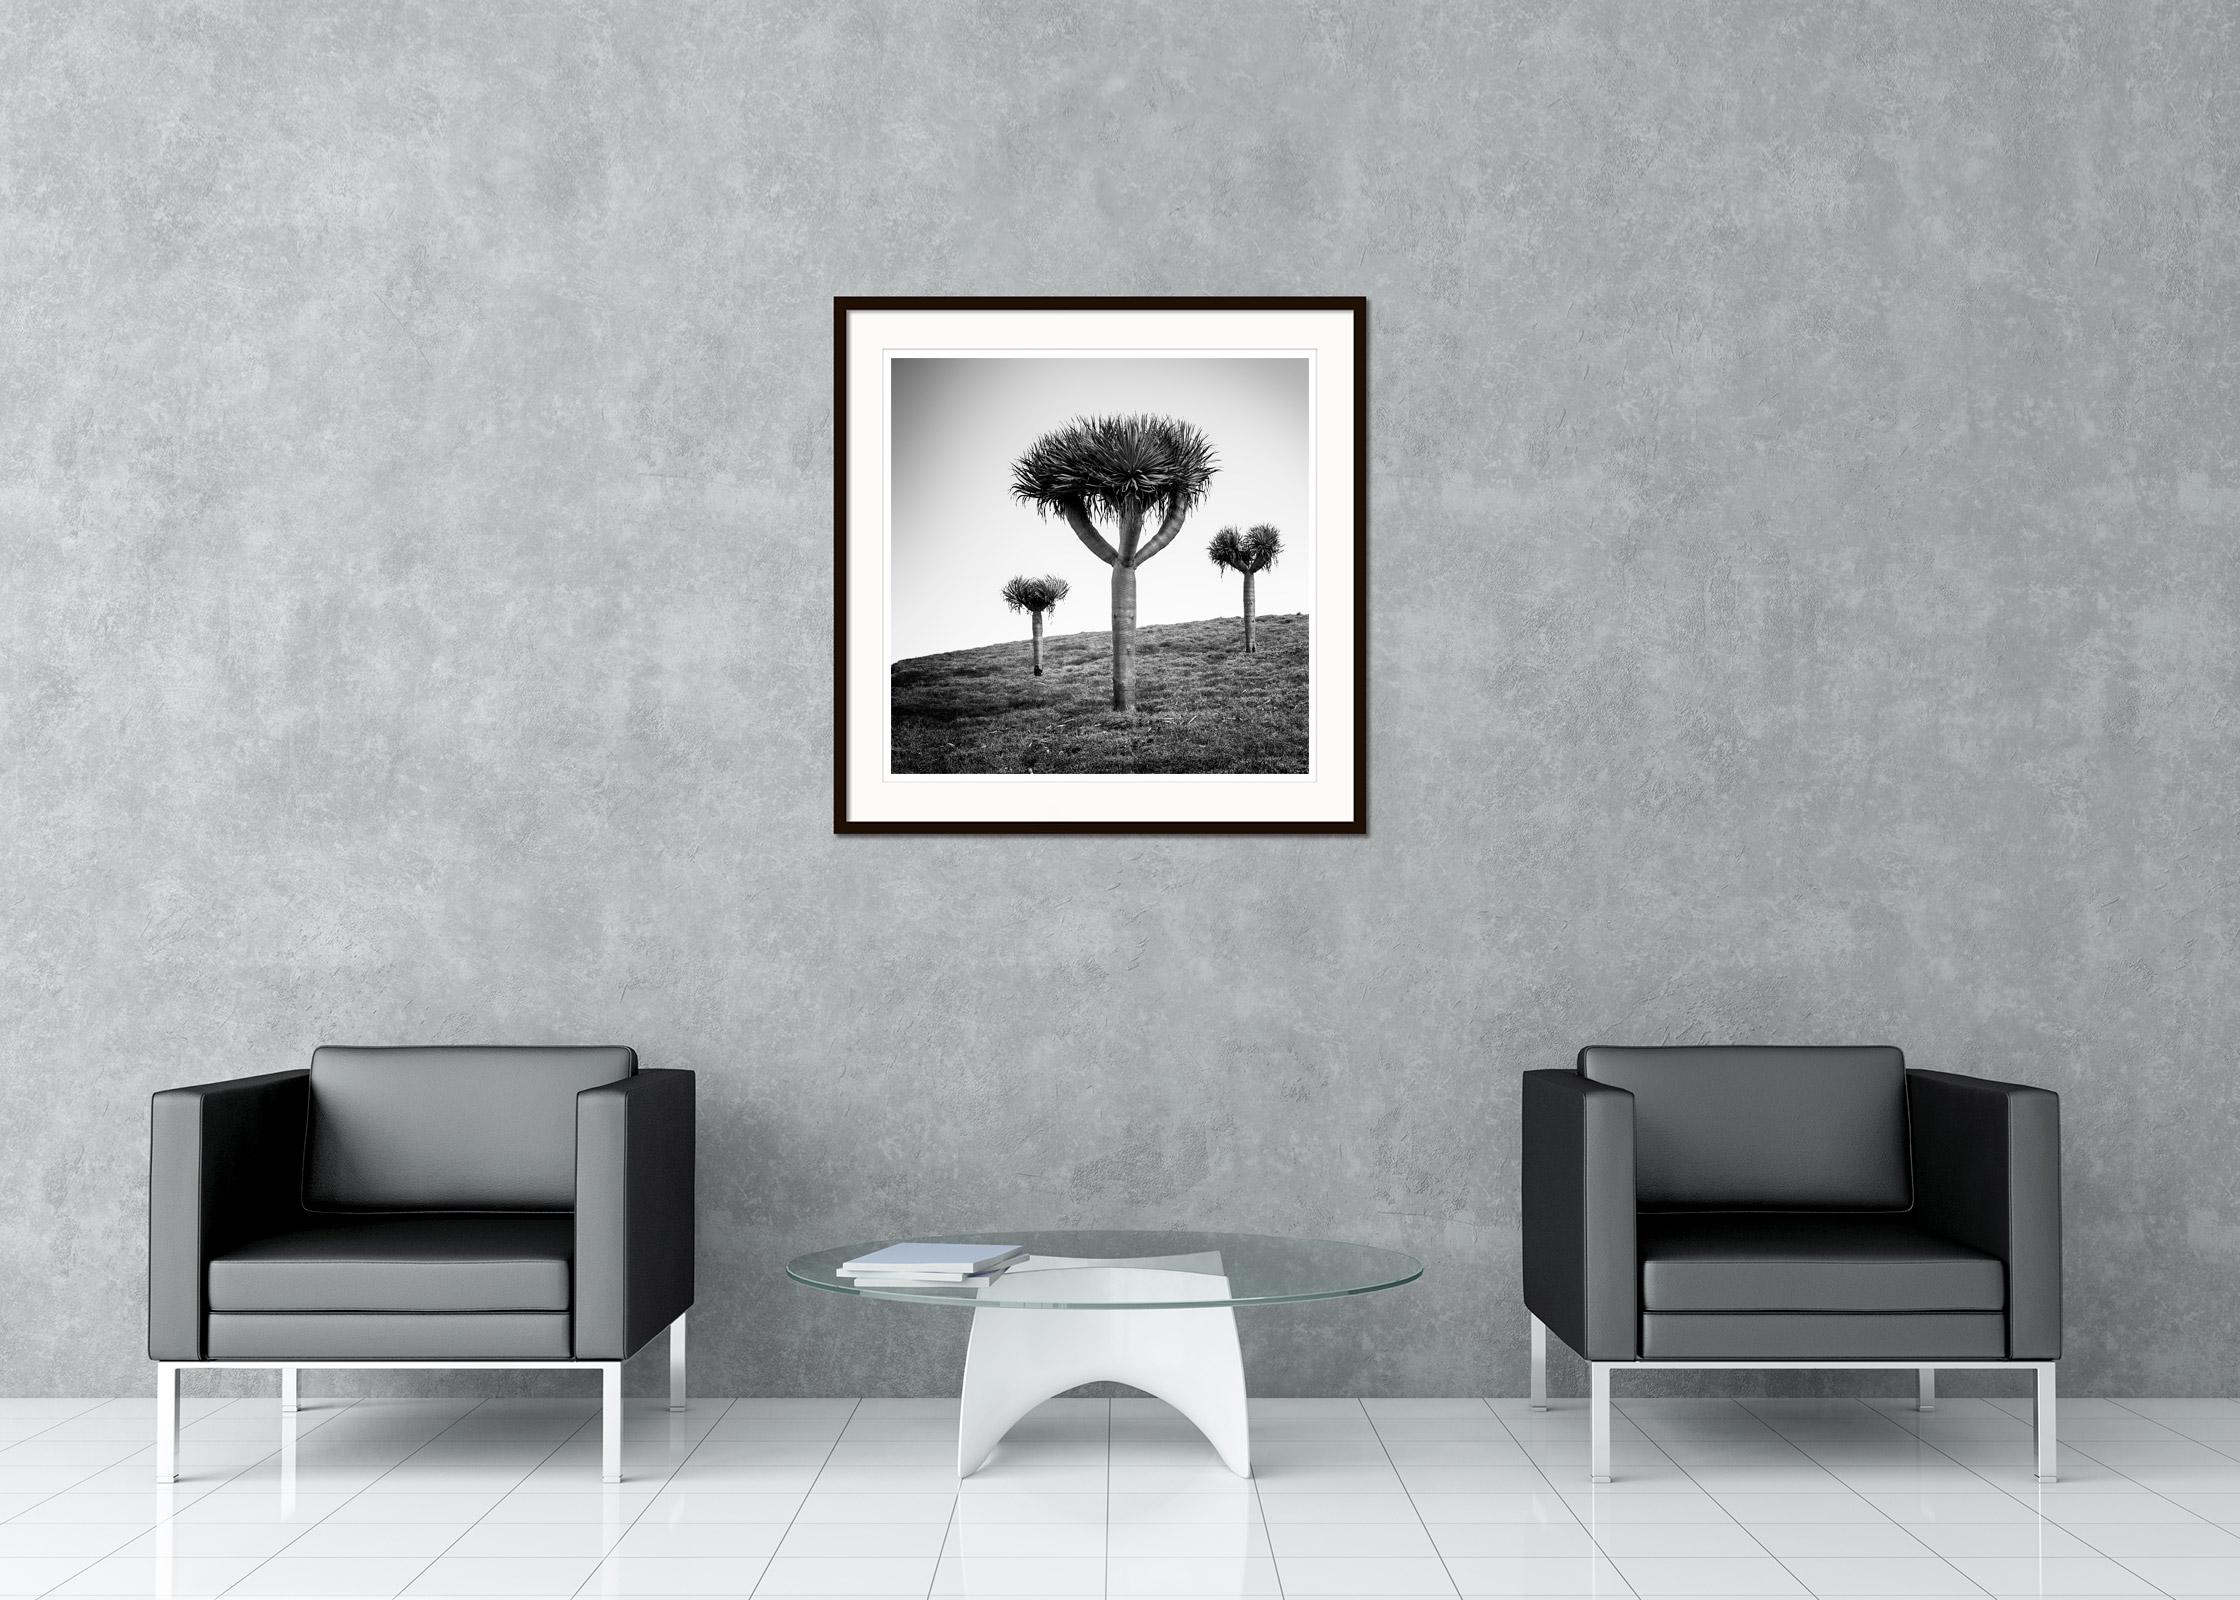 Canary Islands Dragon Tree Madeira Black and White Fine Art Landscape Photograph For Sale 4